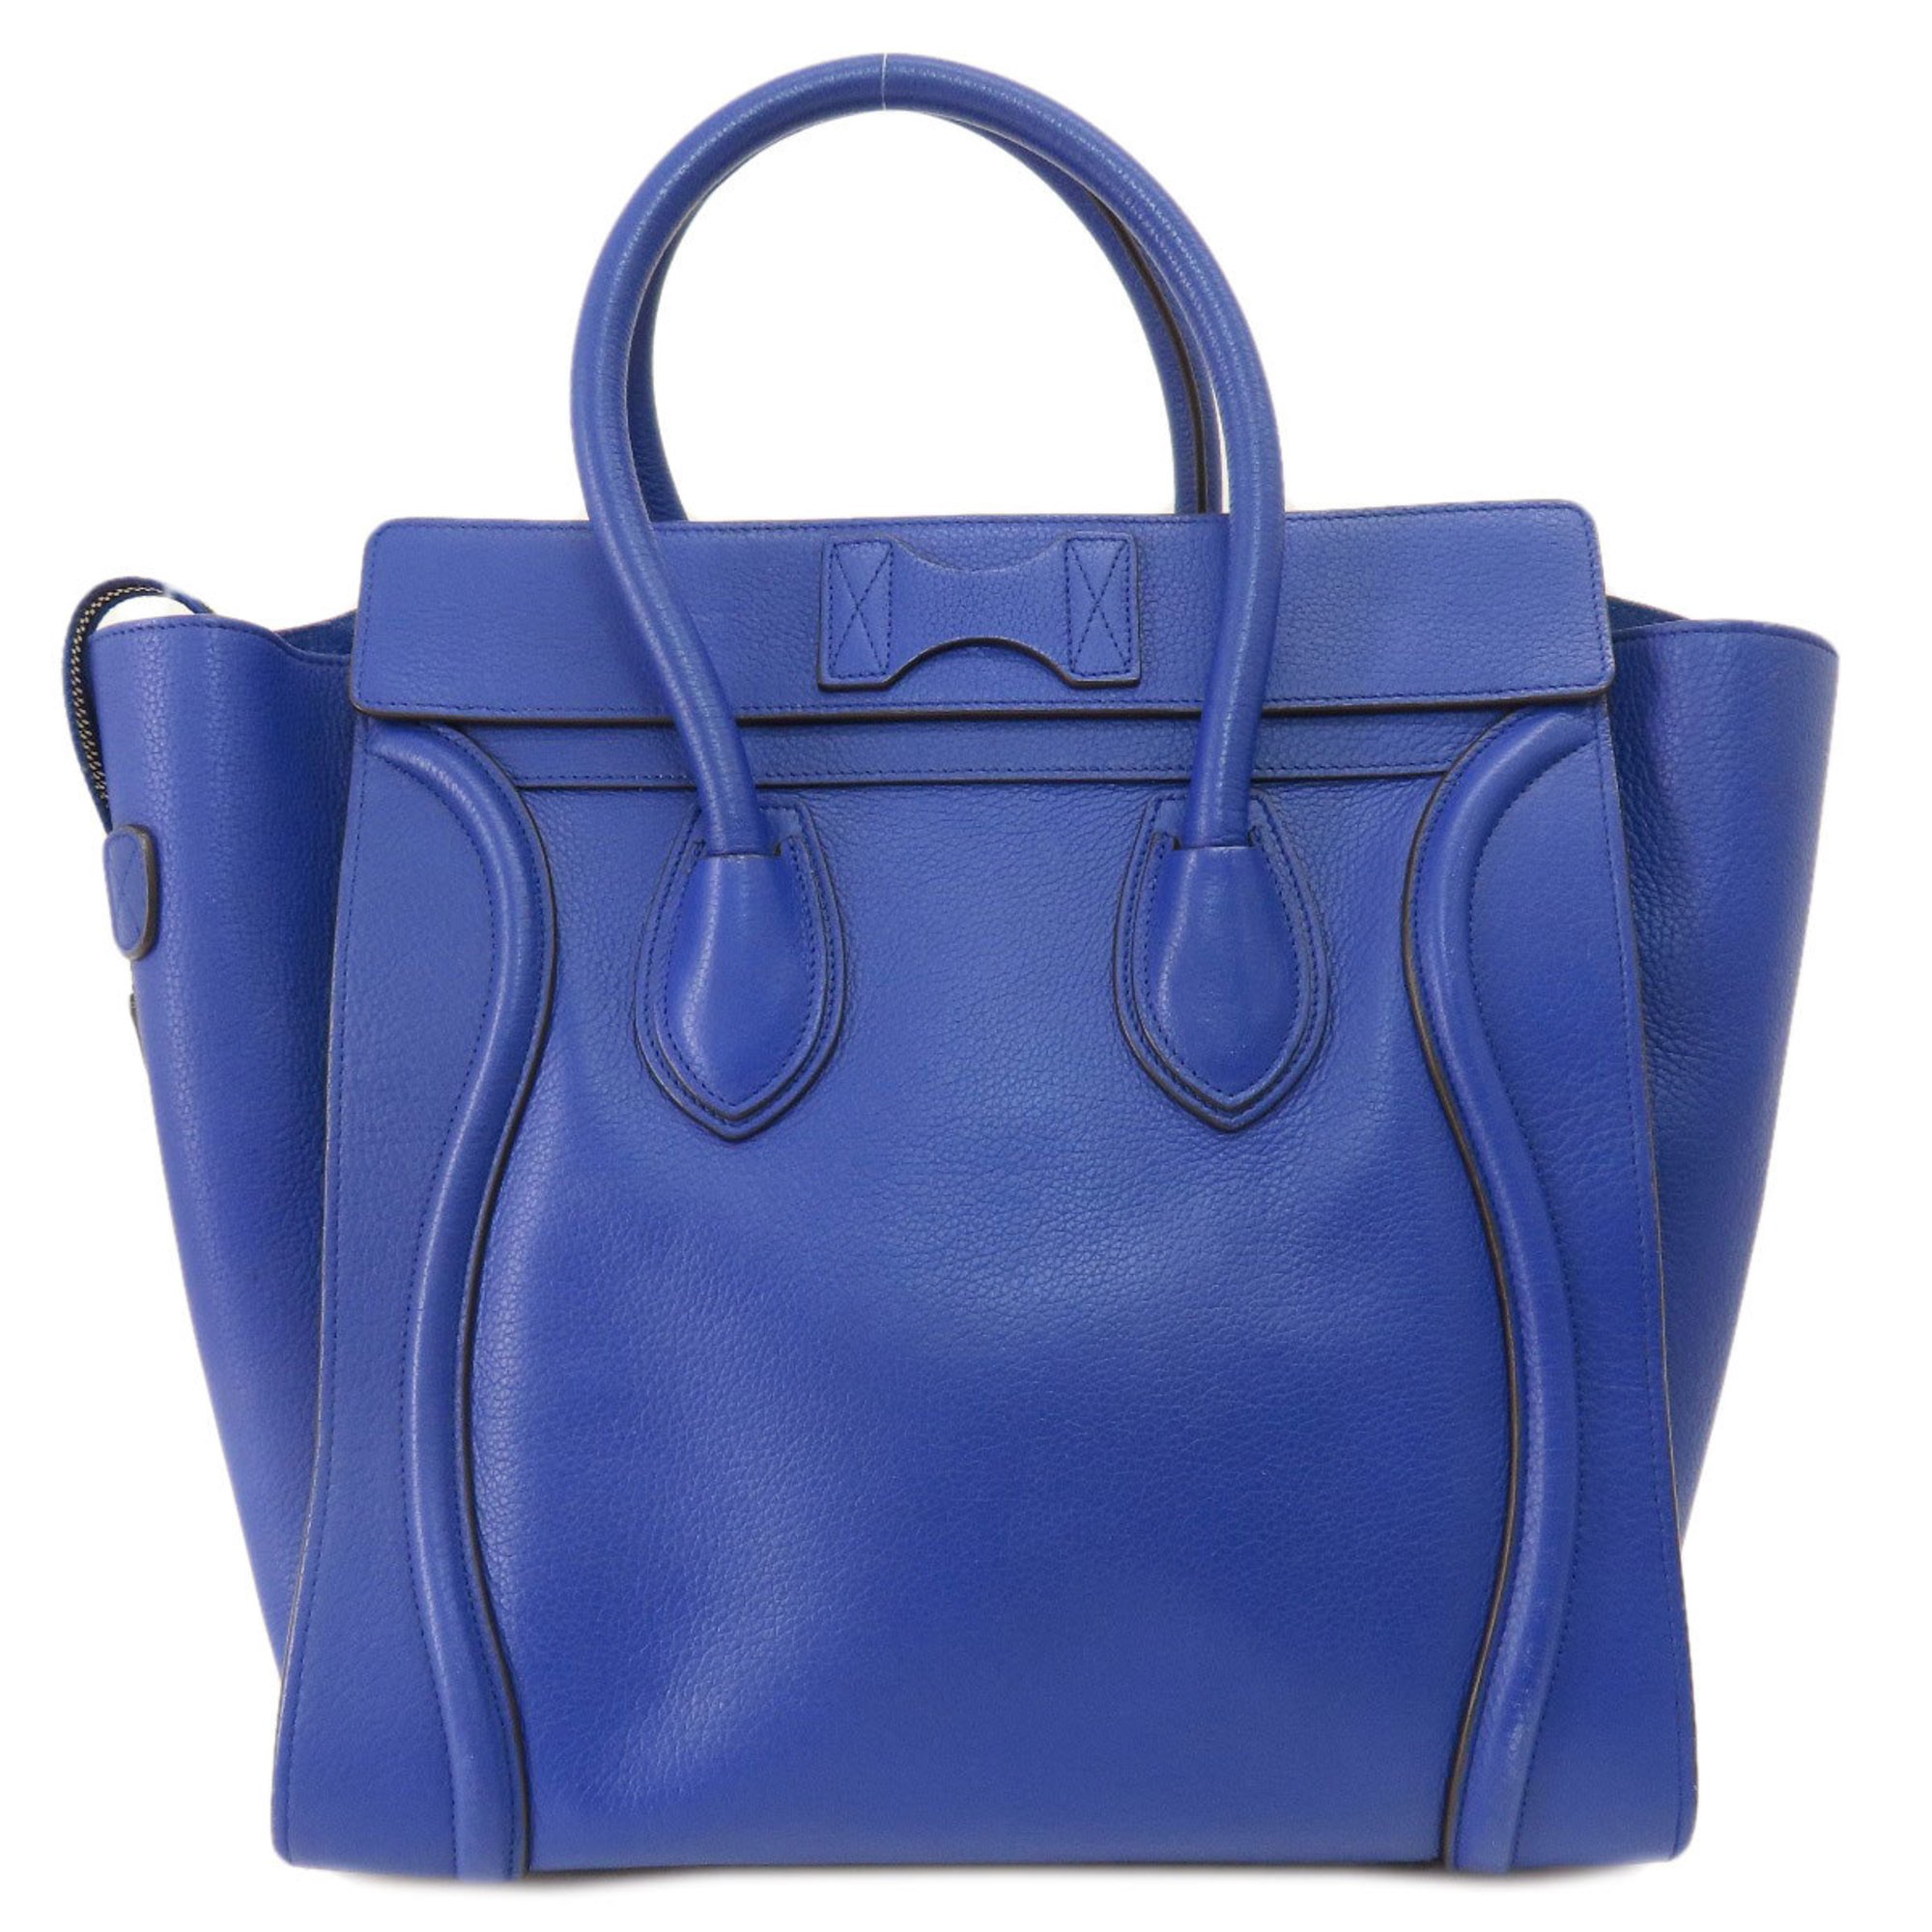 Celine Luggage Micro Tote Bag Leather Women's